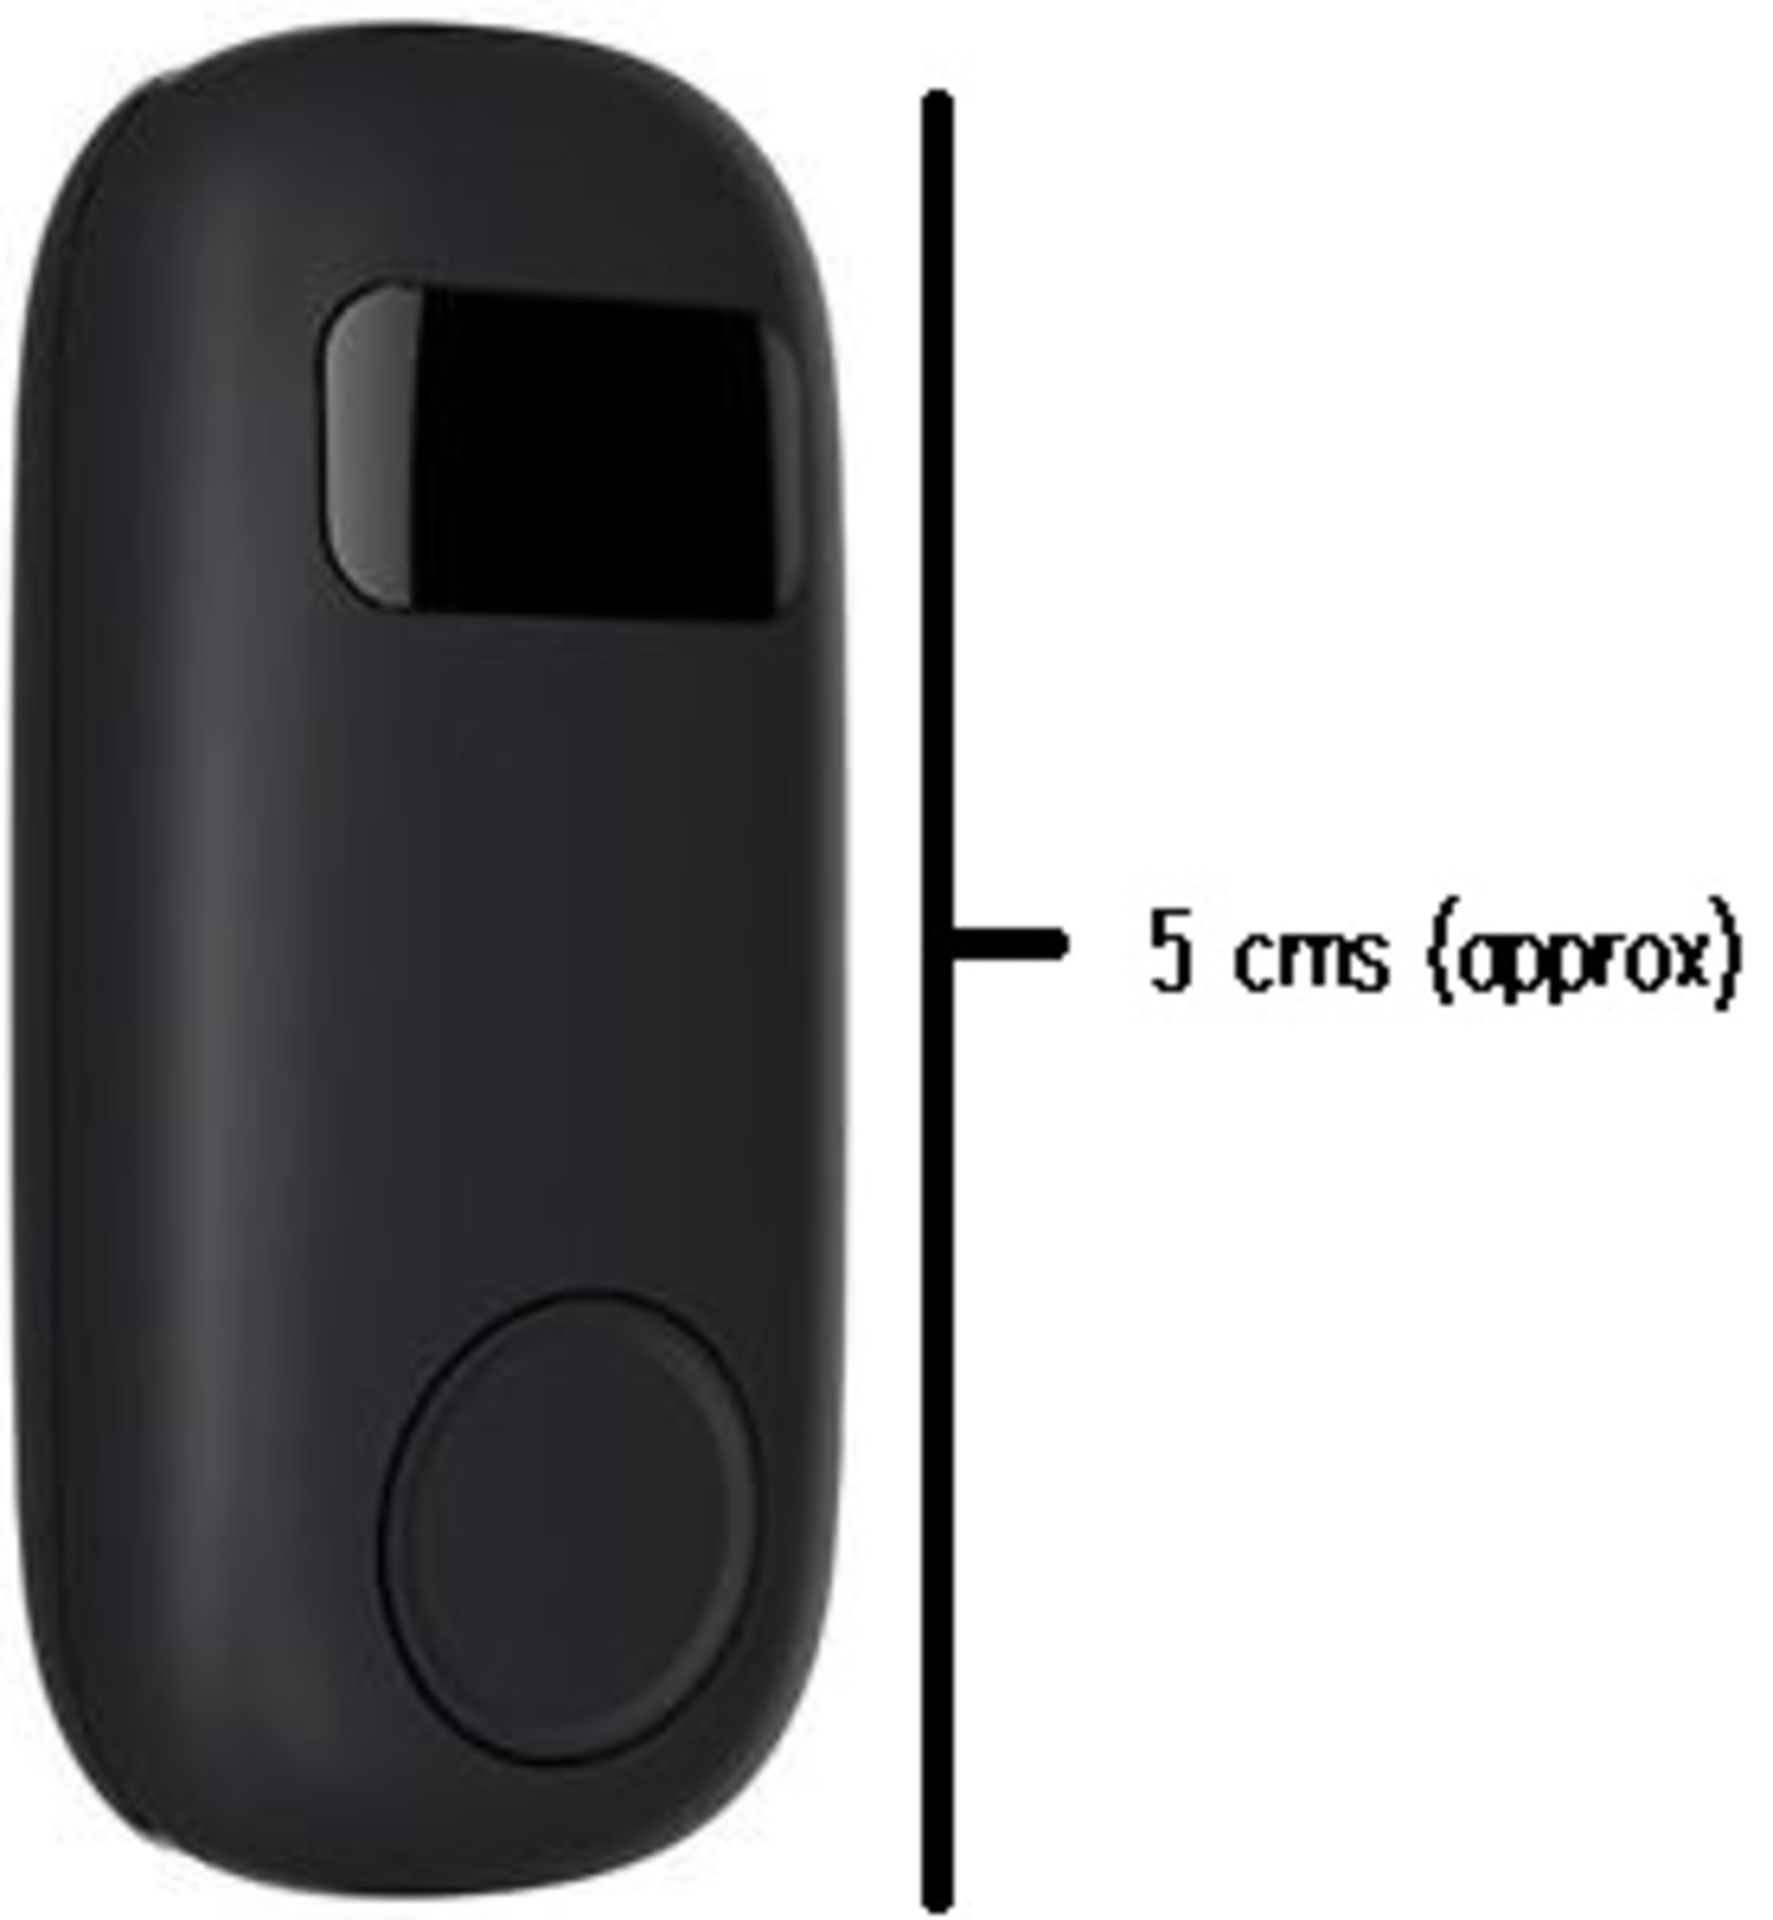 V Brand New SonQui-Worlds Smallest GPS Tracker - With Smartphone App for iOS and Android - With Real - Image 2 of 2